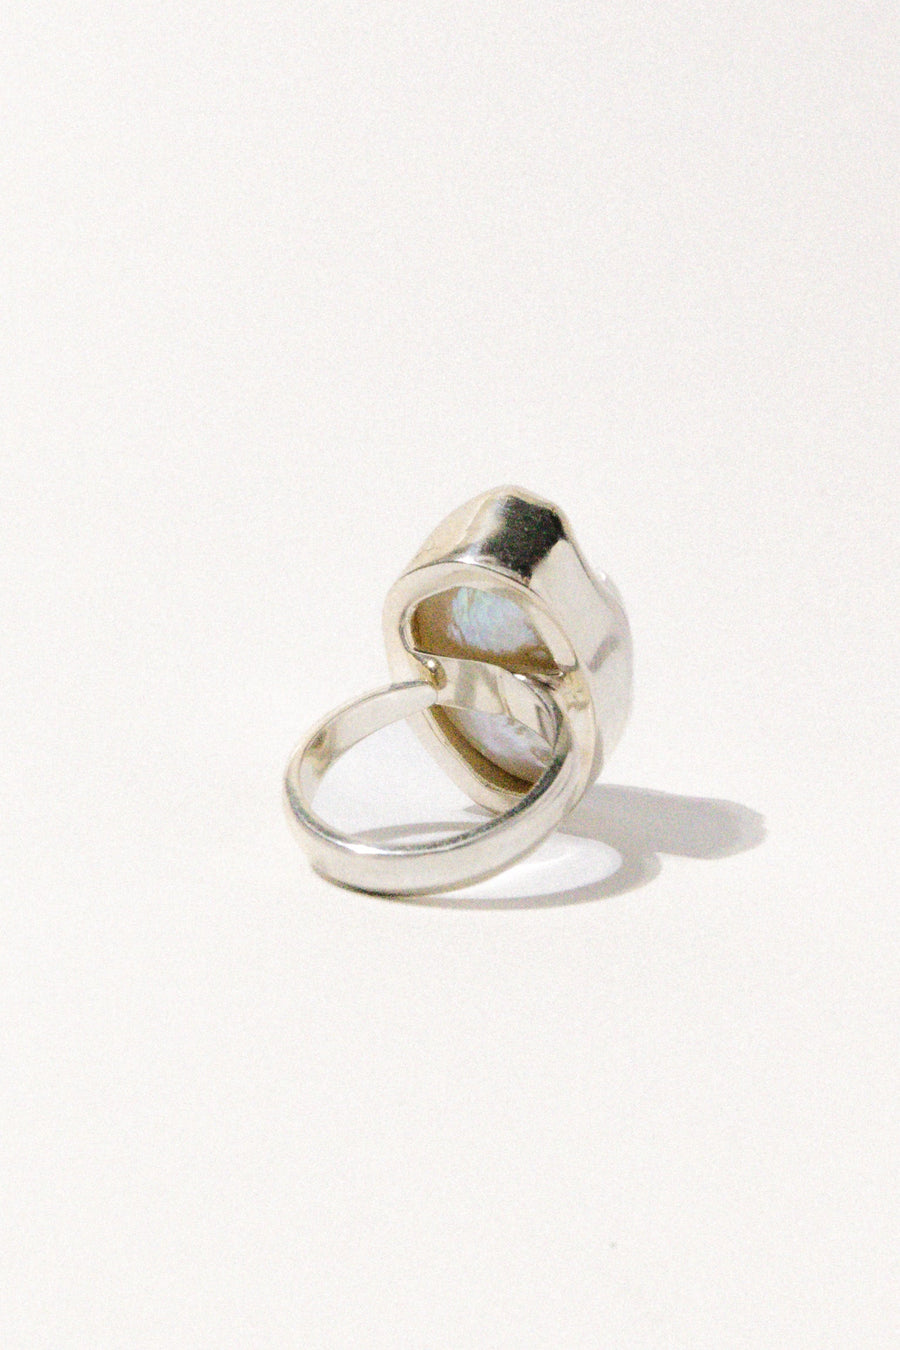 Goddess Jewelry Silver / Open Old Moon Pearl Ring